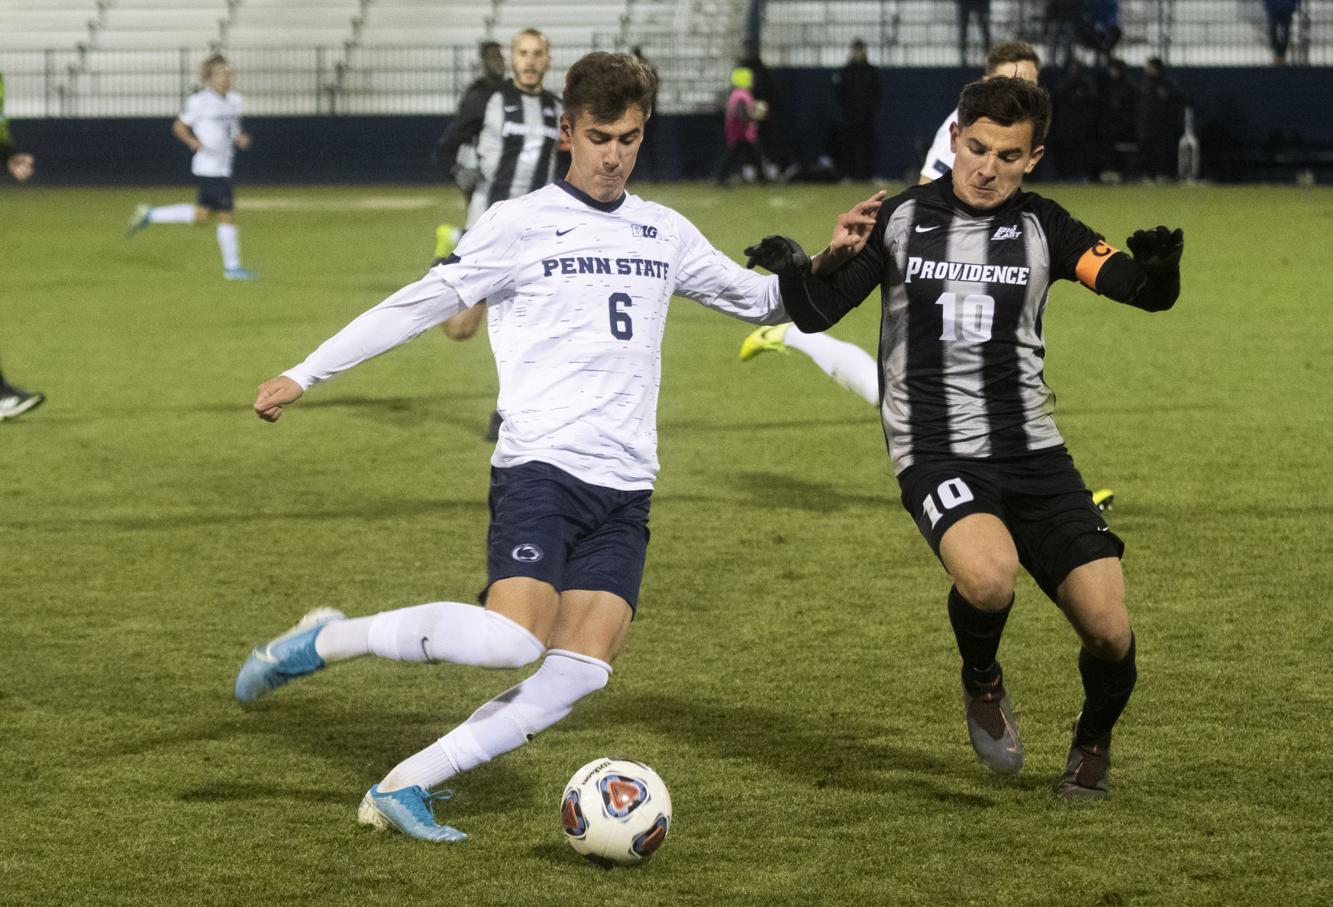 Penn State men's soccer looks internally to improve after its 1st